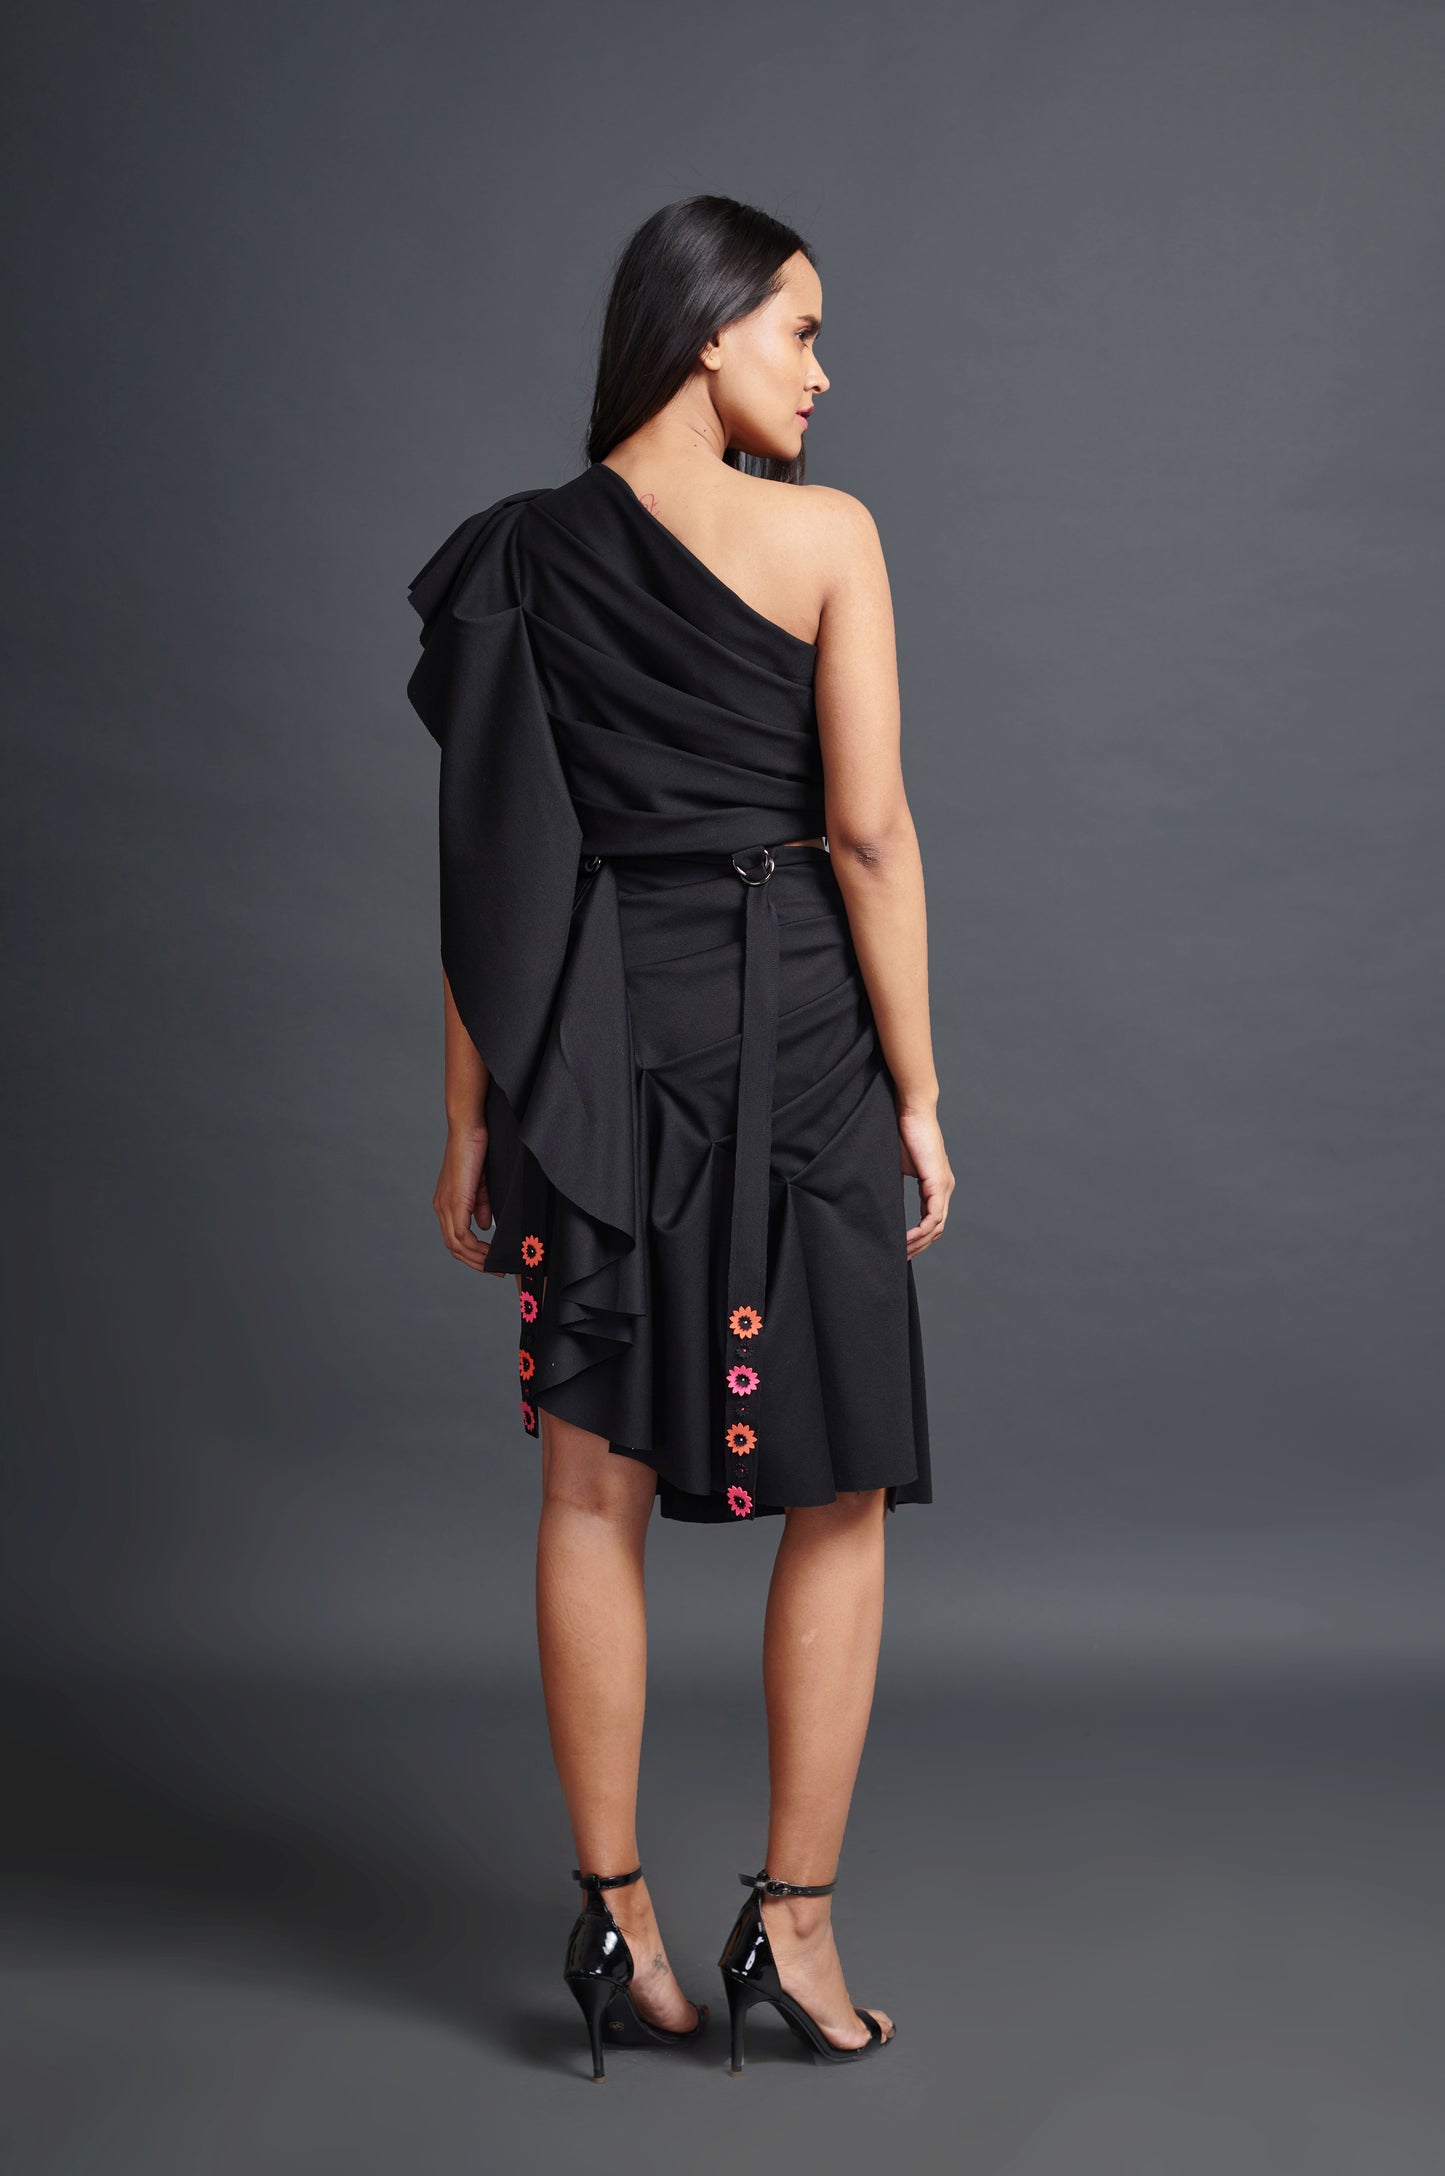 Image of BLACK ONE SHOULDER DETACHABLE DRAPE CO-ORD SET. From savoirfashions.com